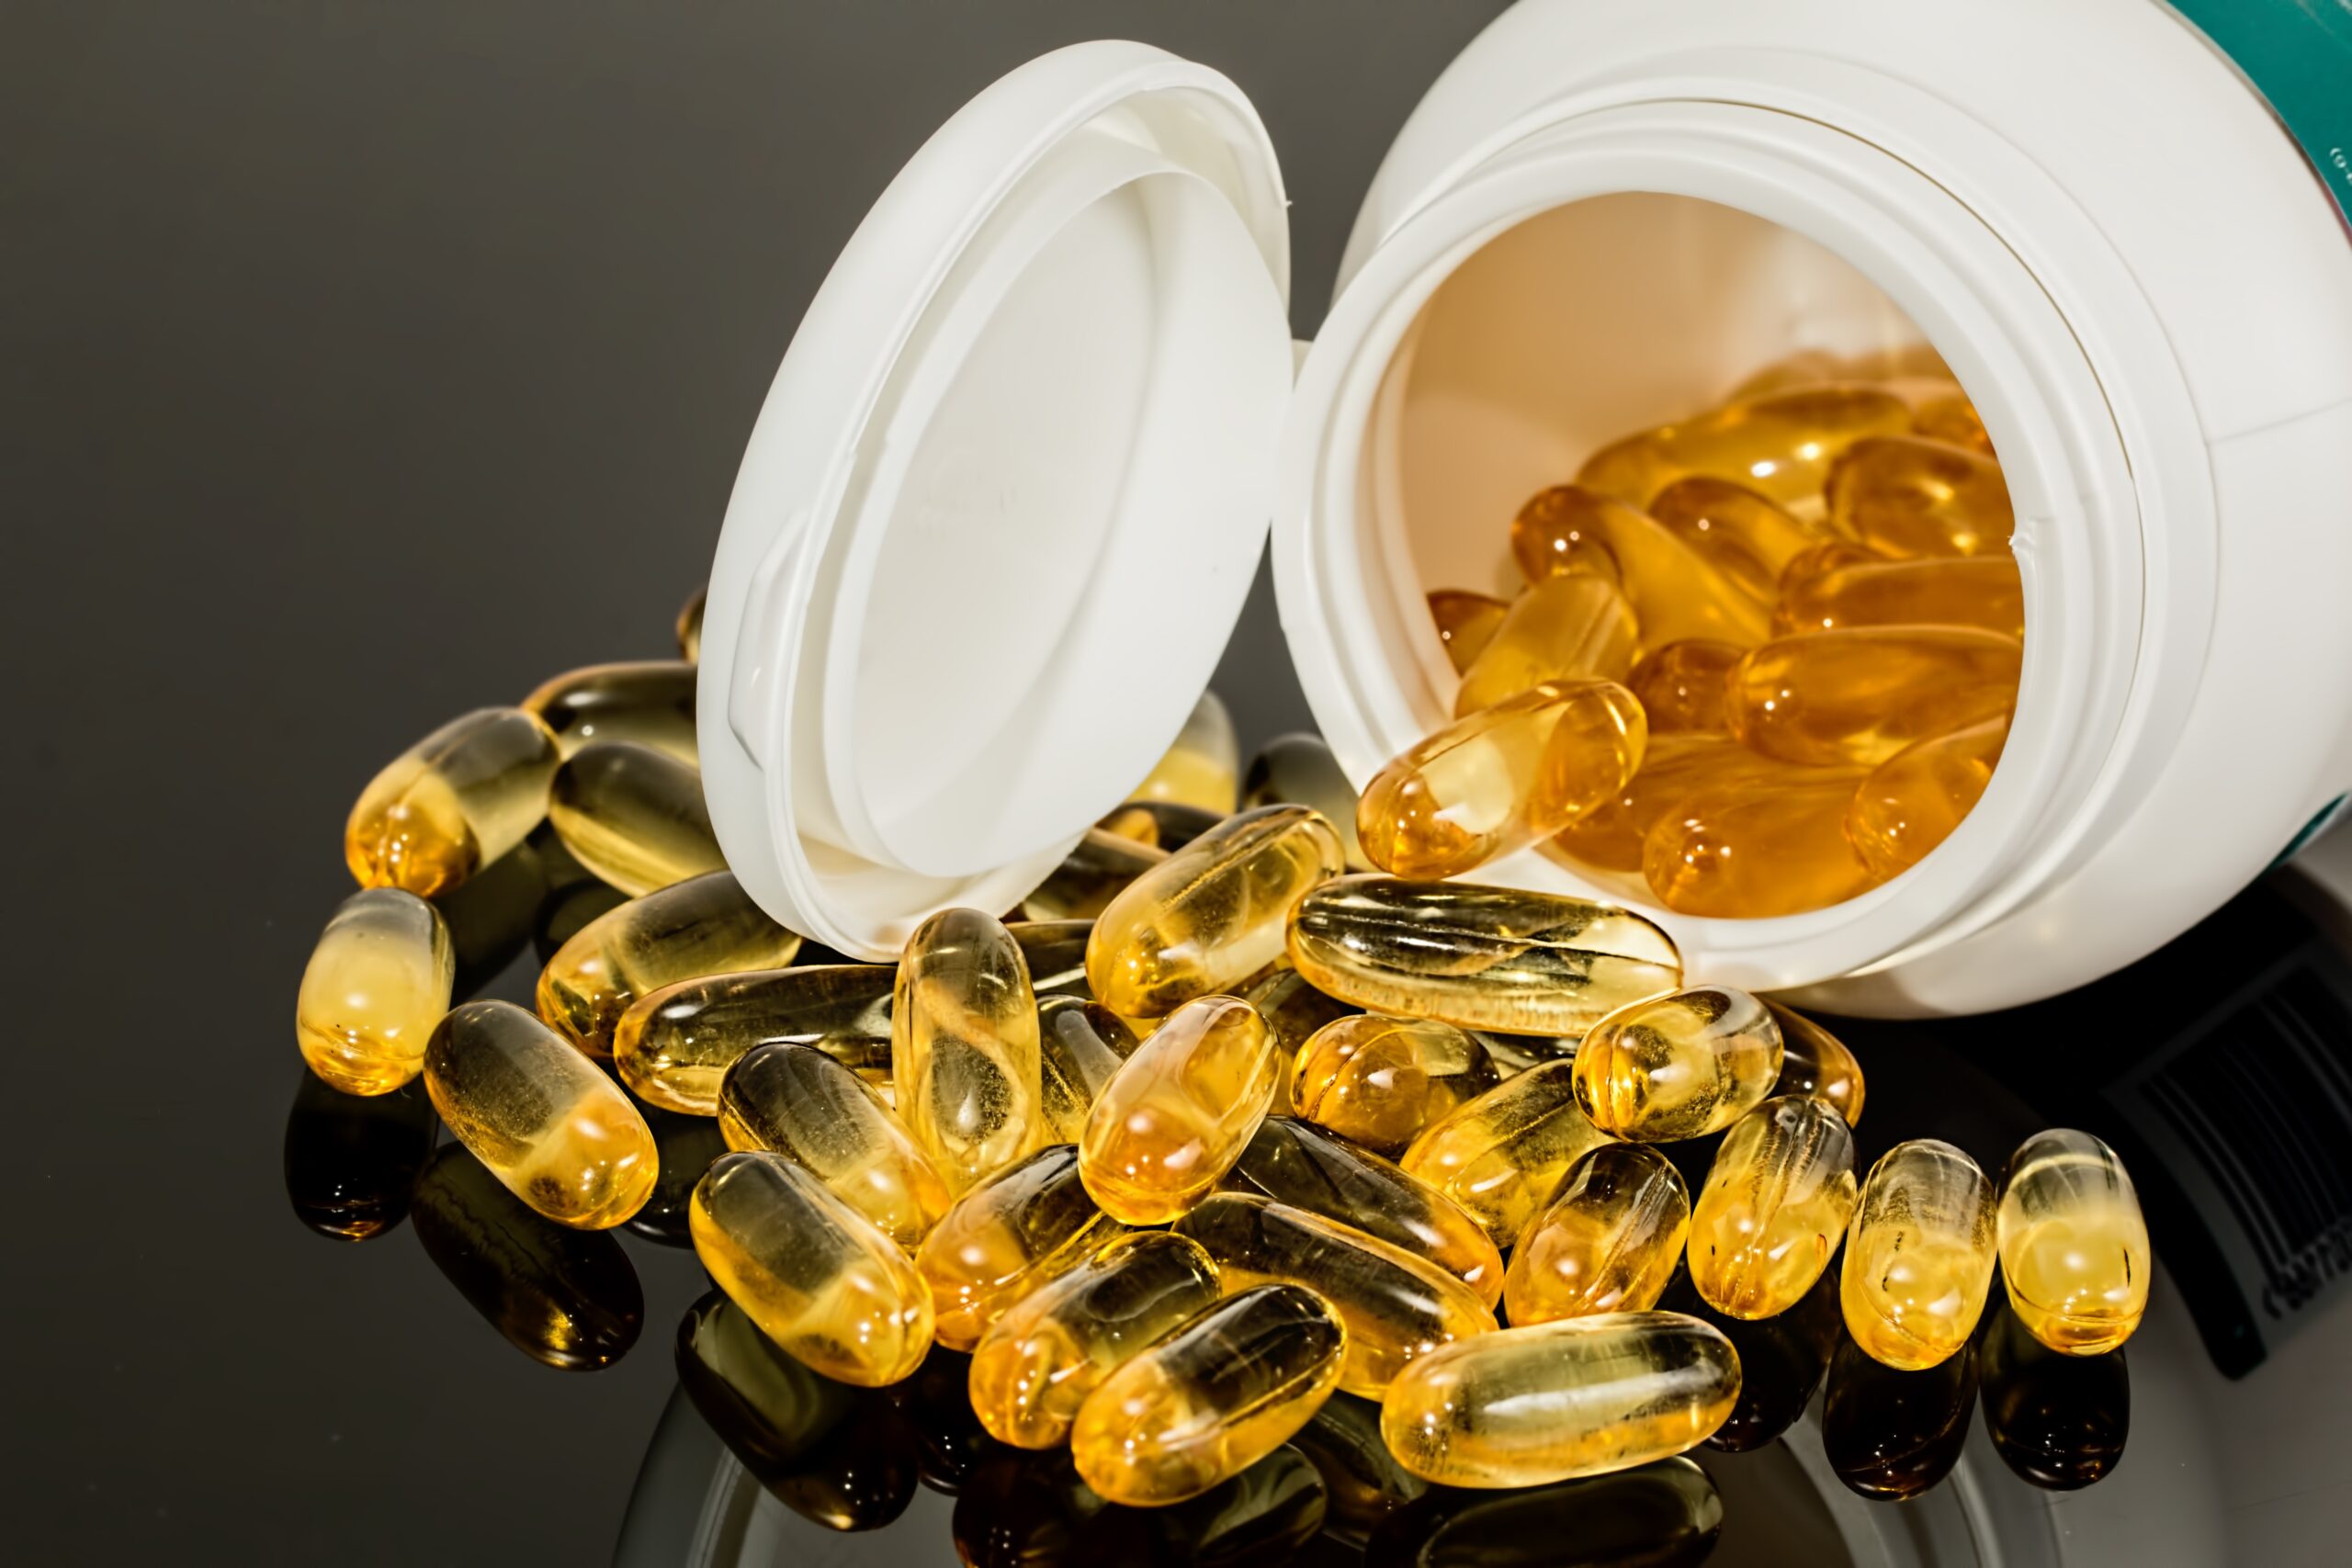 If you’re taking vitamin D, you’re probably taking too much